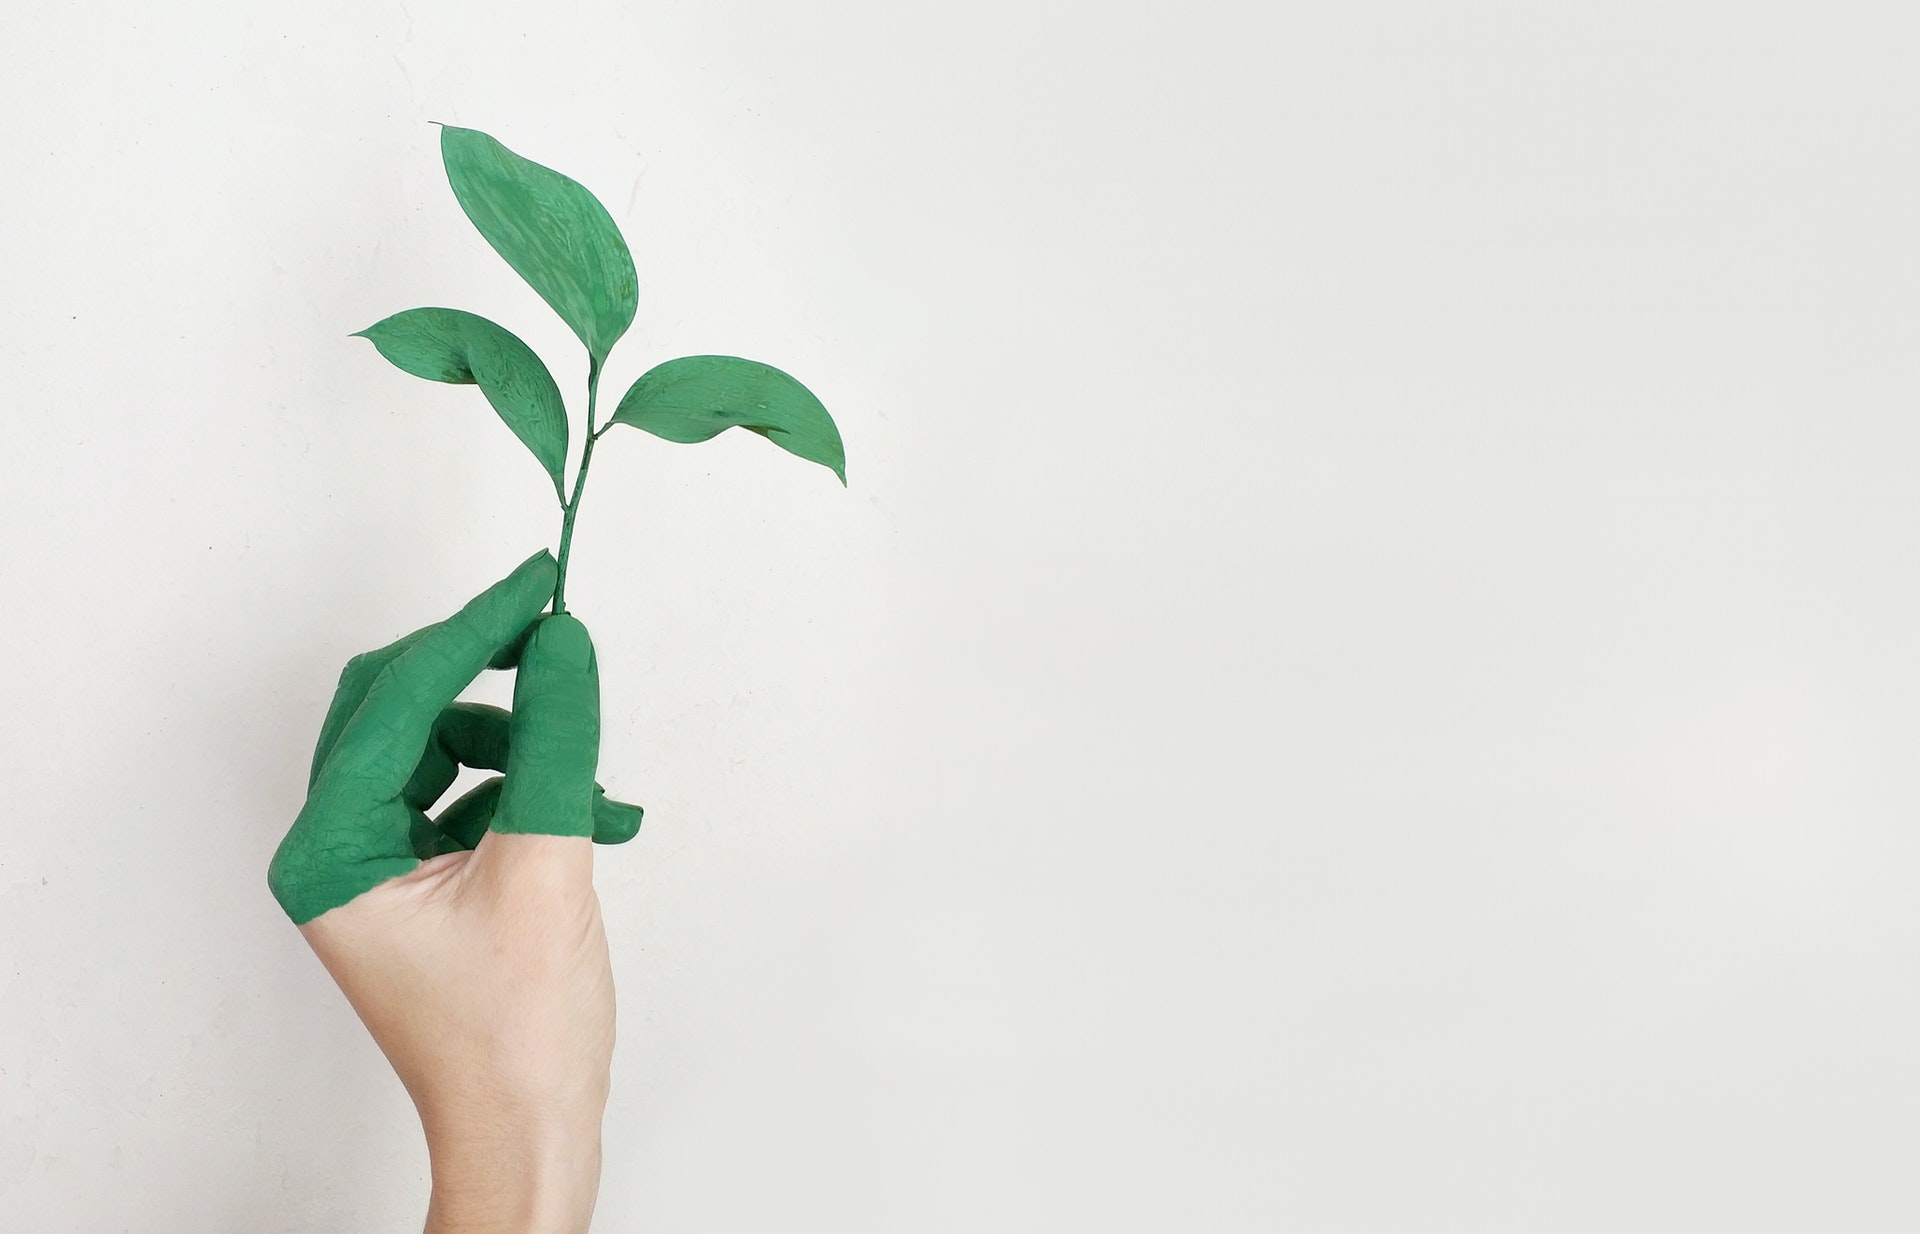 A woman's hand holding an eco-friendly plant on a white wall.